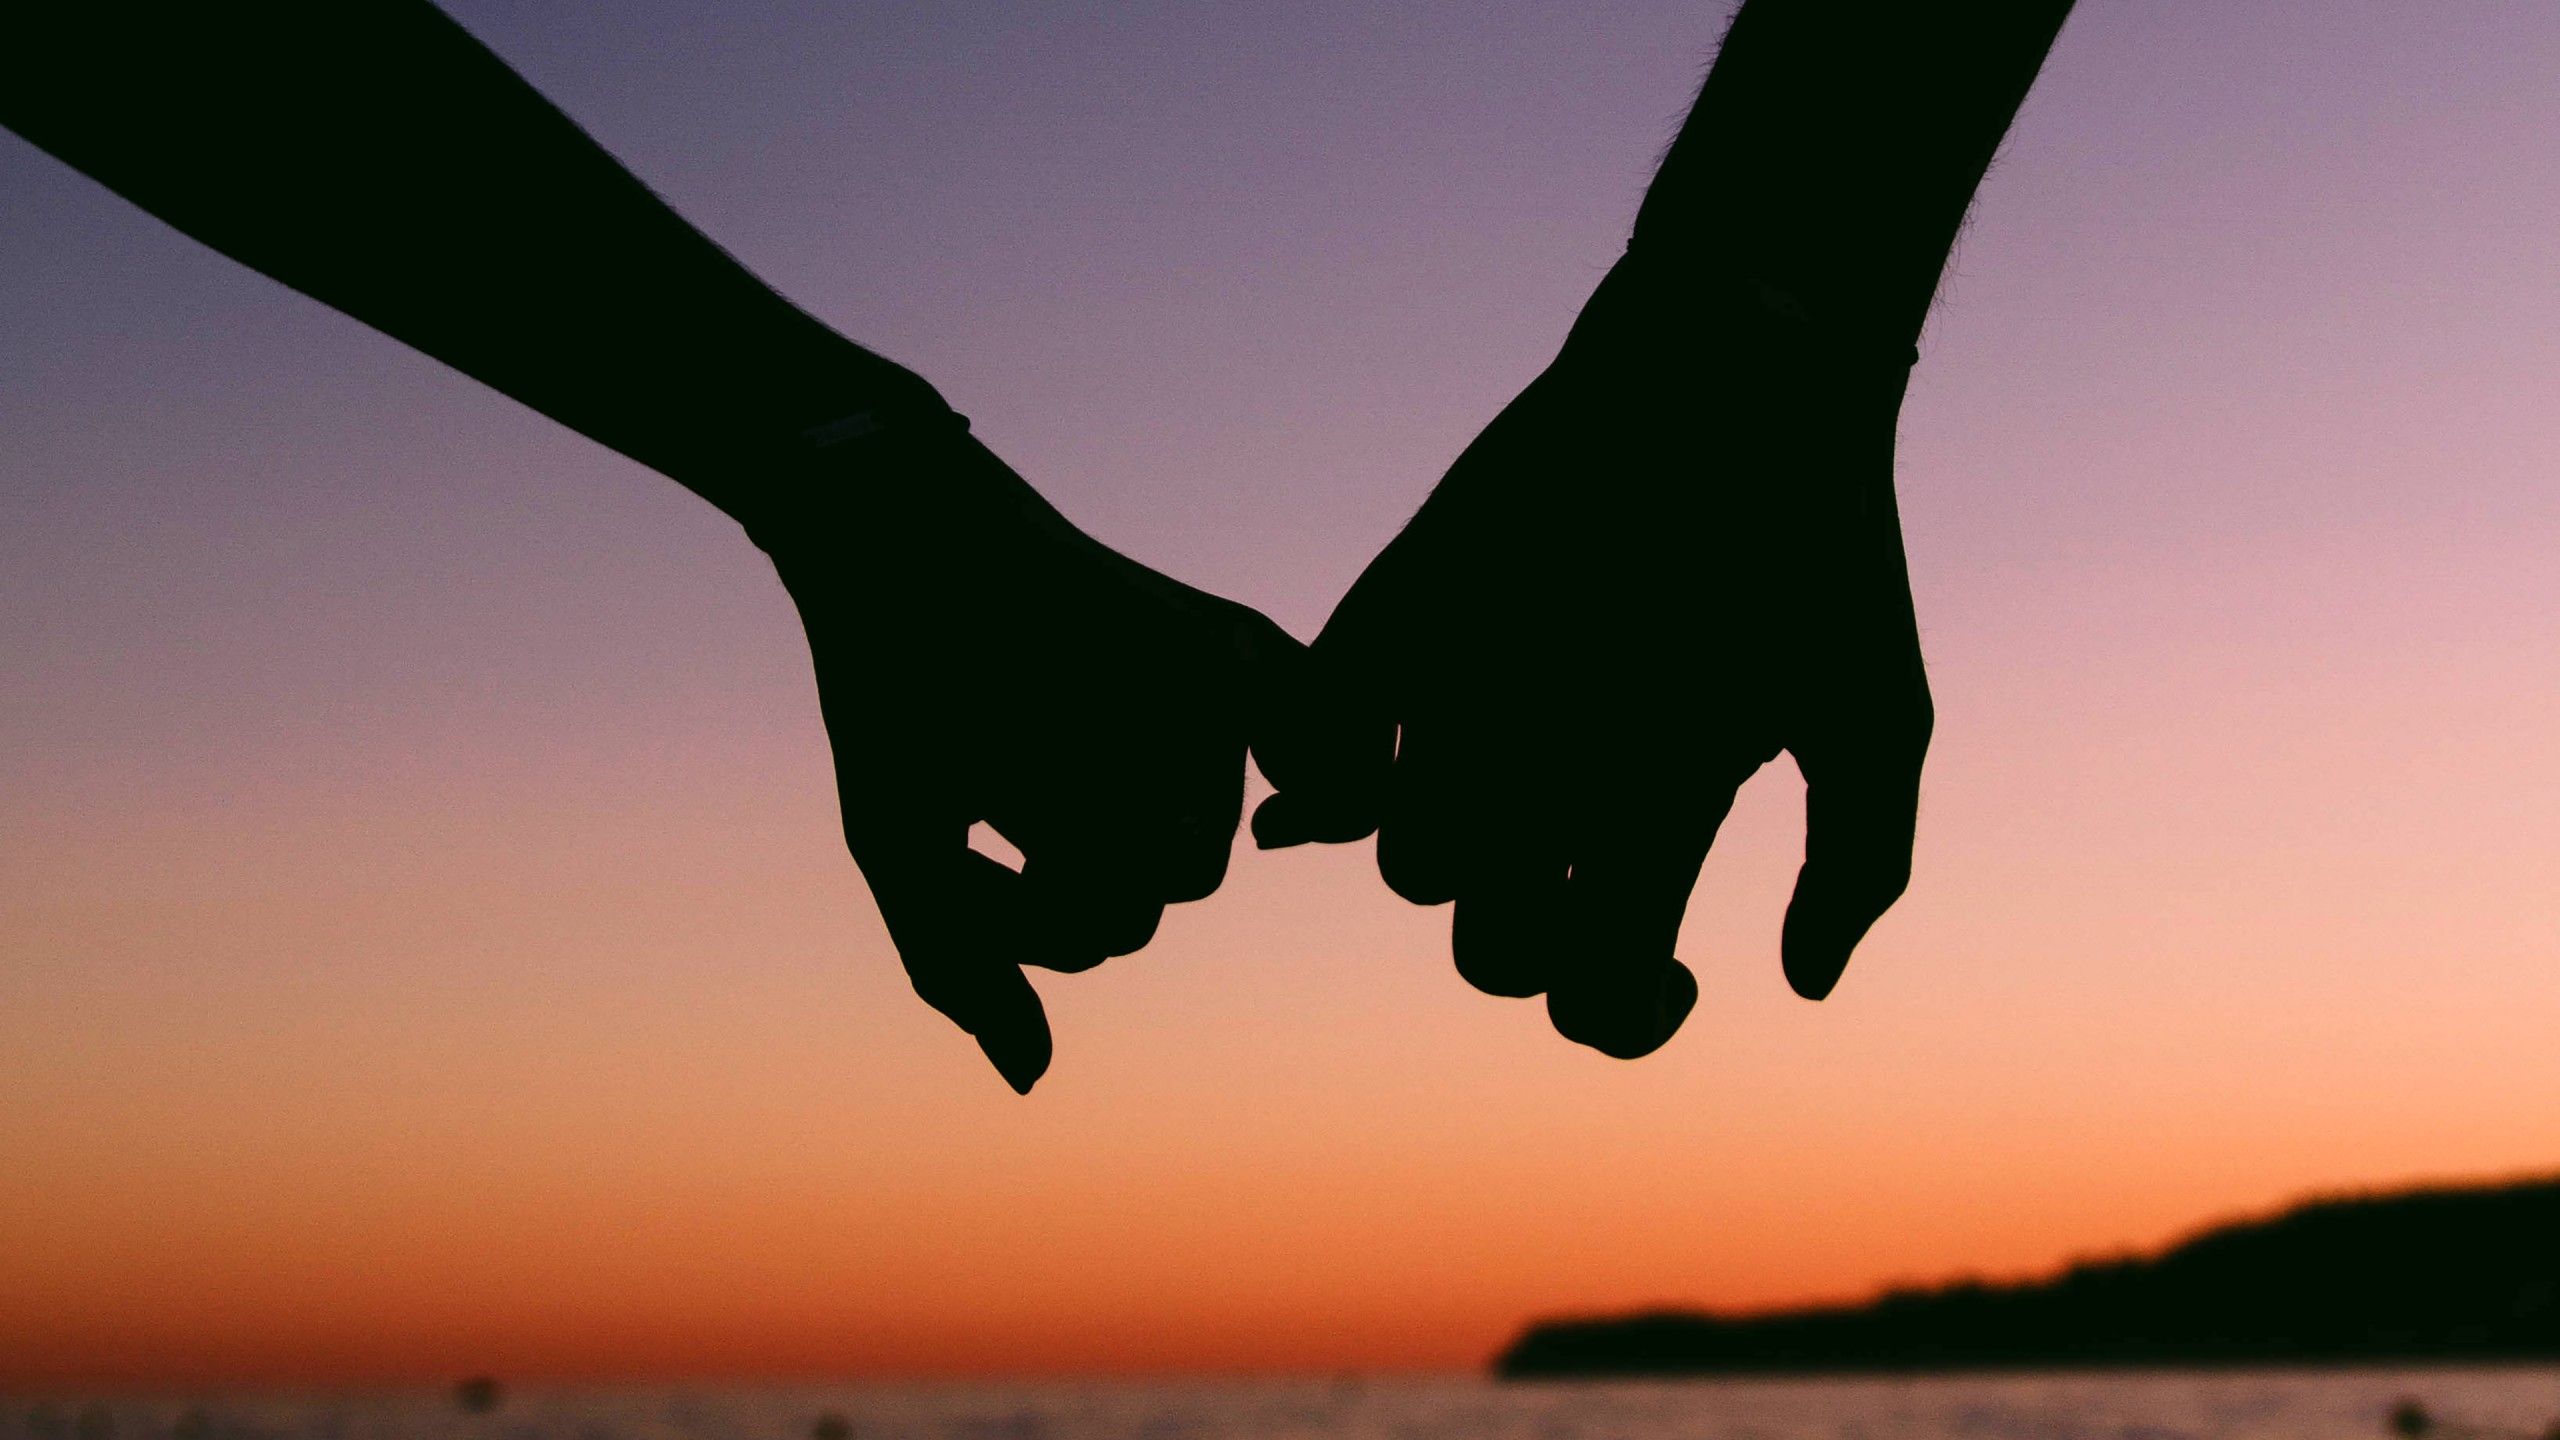 Hands together 4K Wallpaper, Couple, Silhouette, Sunset, Romantic, Love